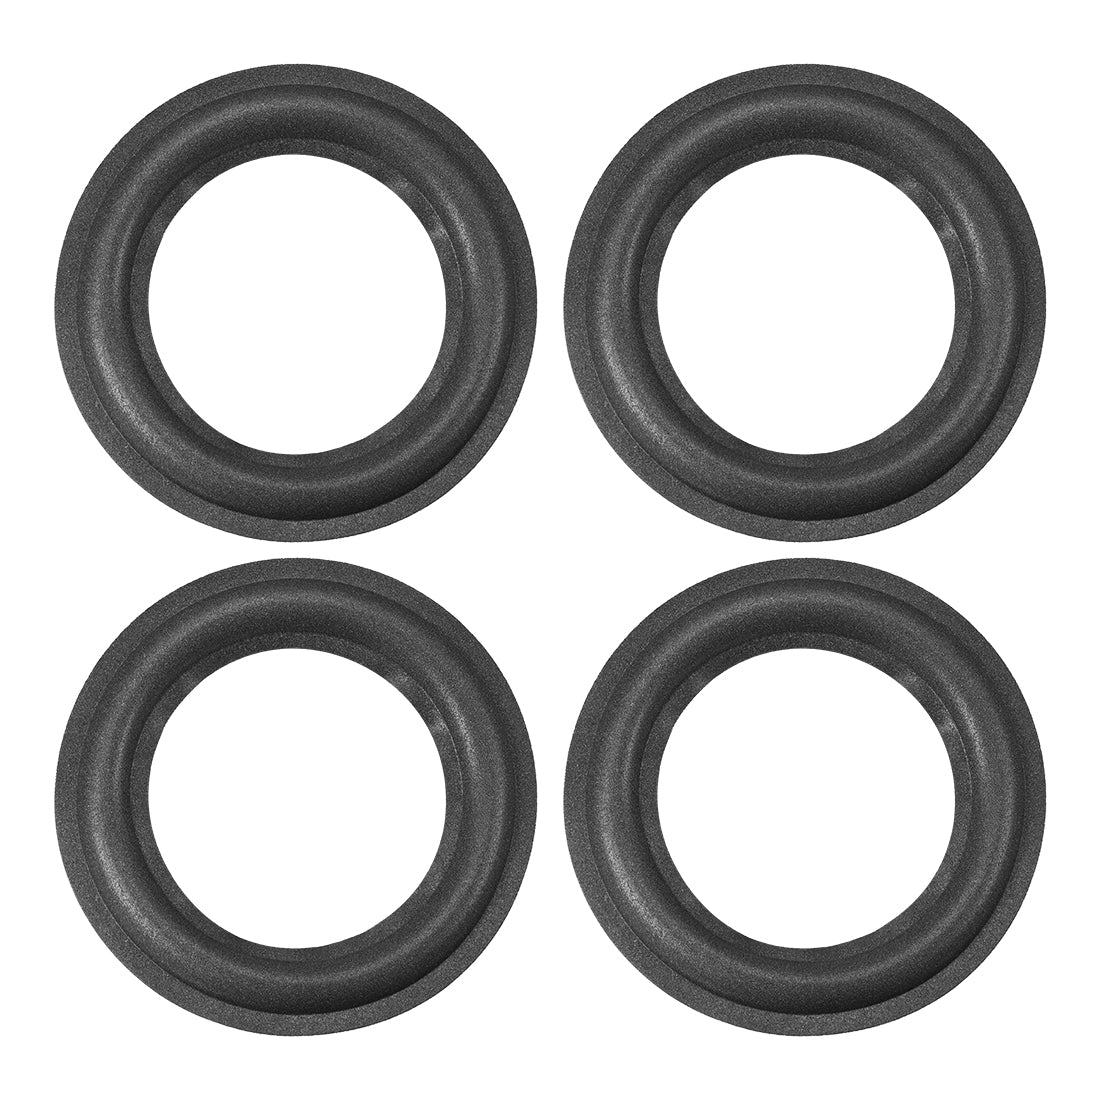 uxcell Uxcell 4.5" 4.5 inch Speaker Foam Edge Surround Rings Replacement Parts for Speaker Repair or DIY 4pcs